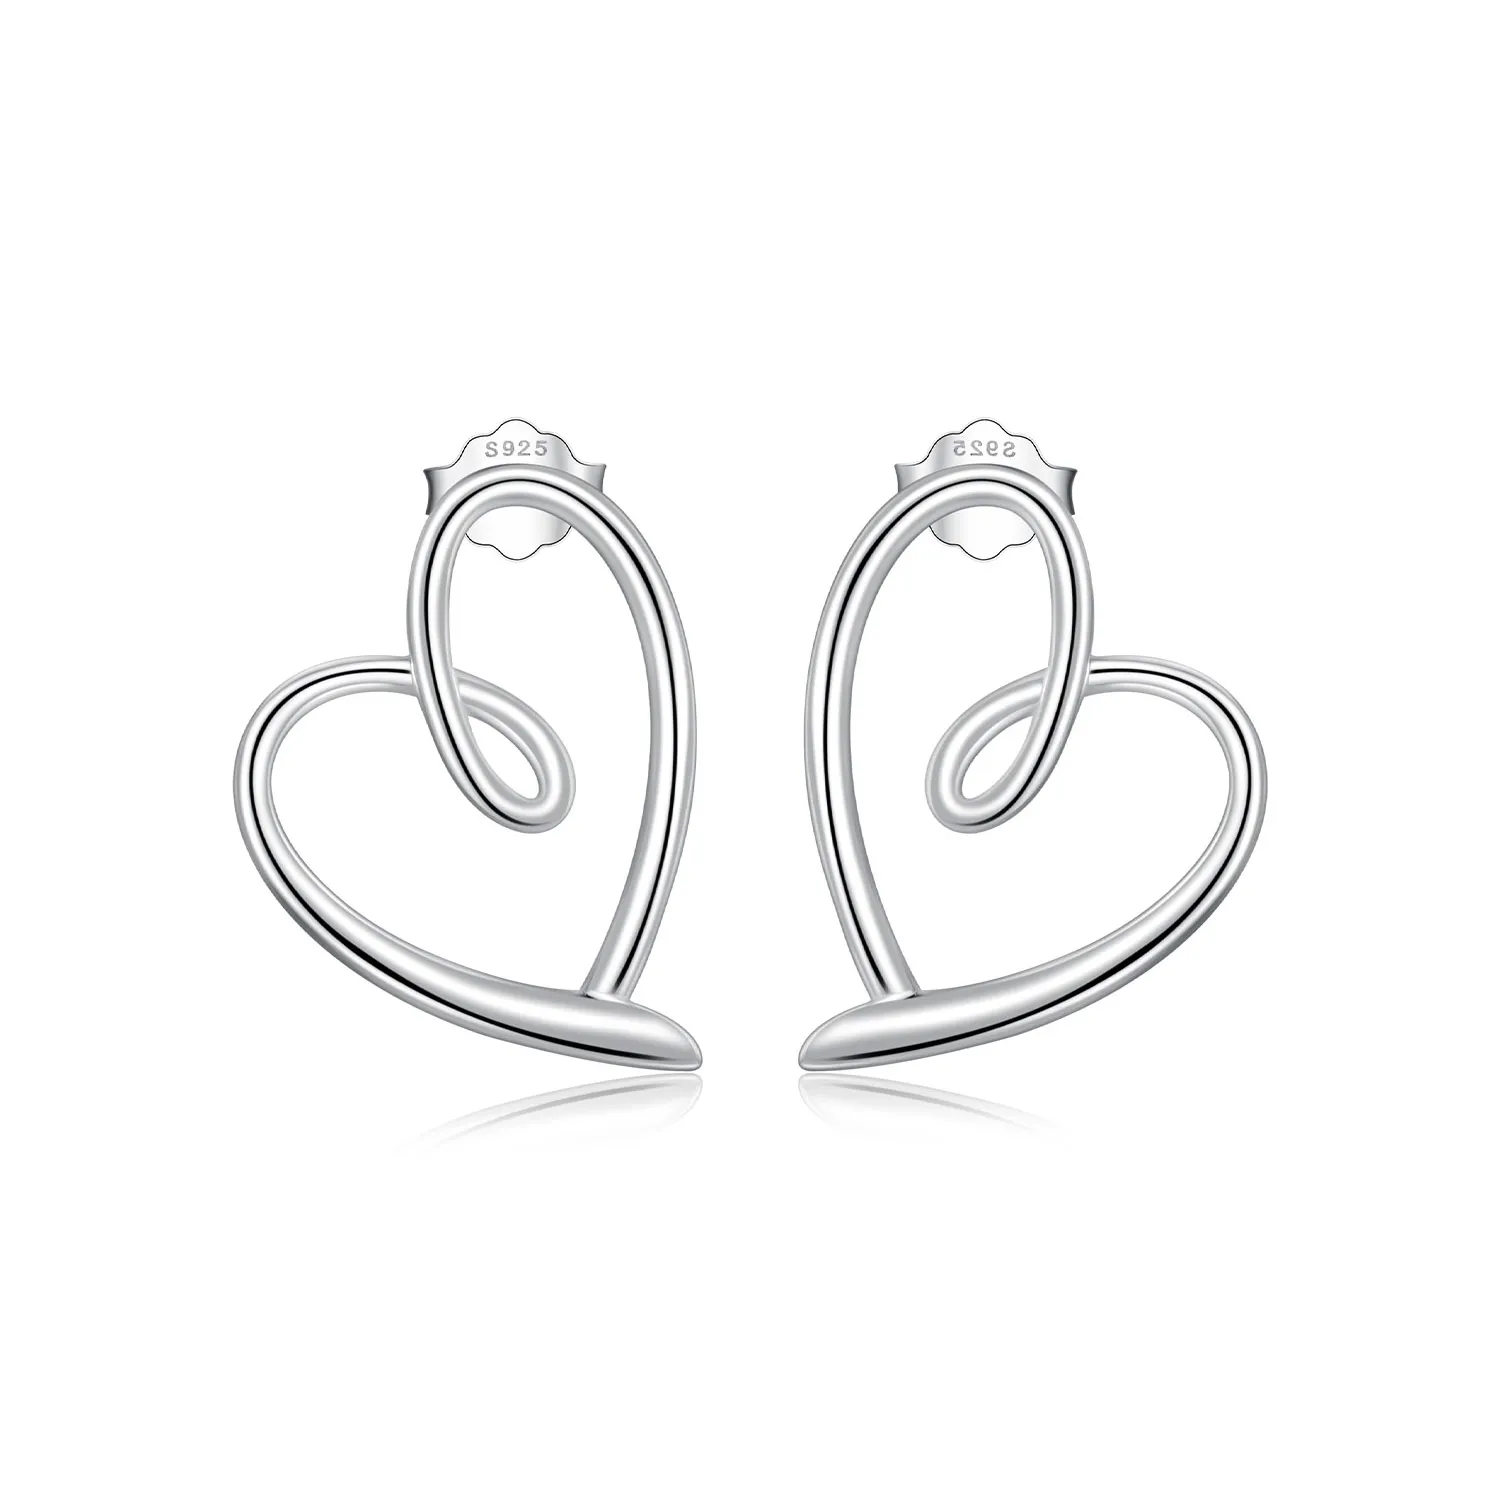 Pandora Style Wrapped In Love Studs Earrings - BSE871